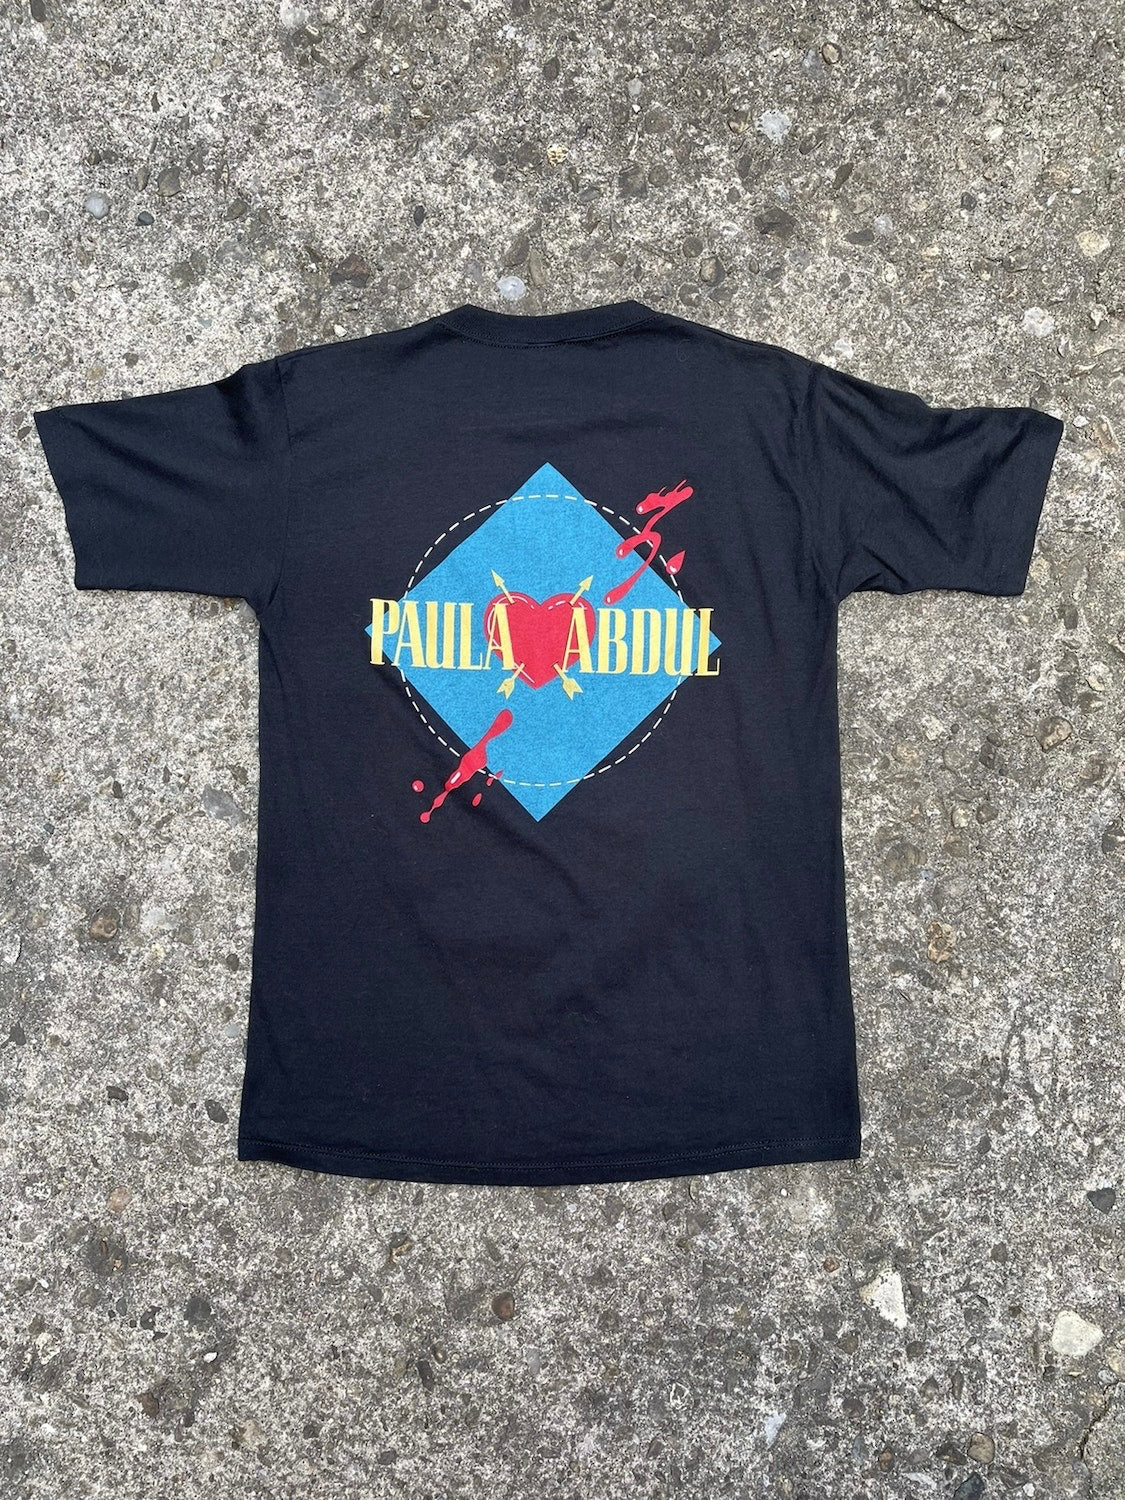 1990 Paula Abdul 'Forever Your Girl' Tour Band T-Shirt - M